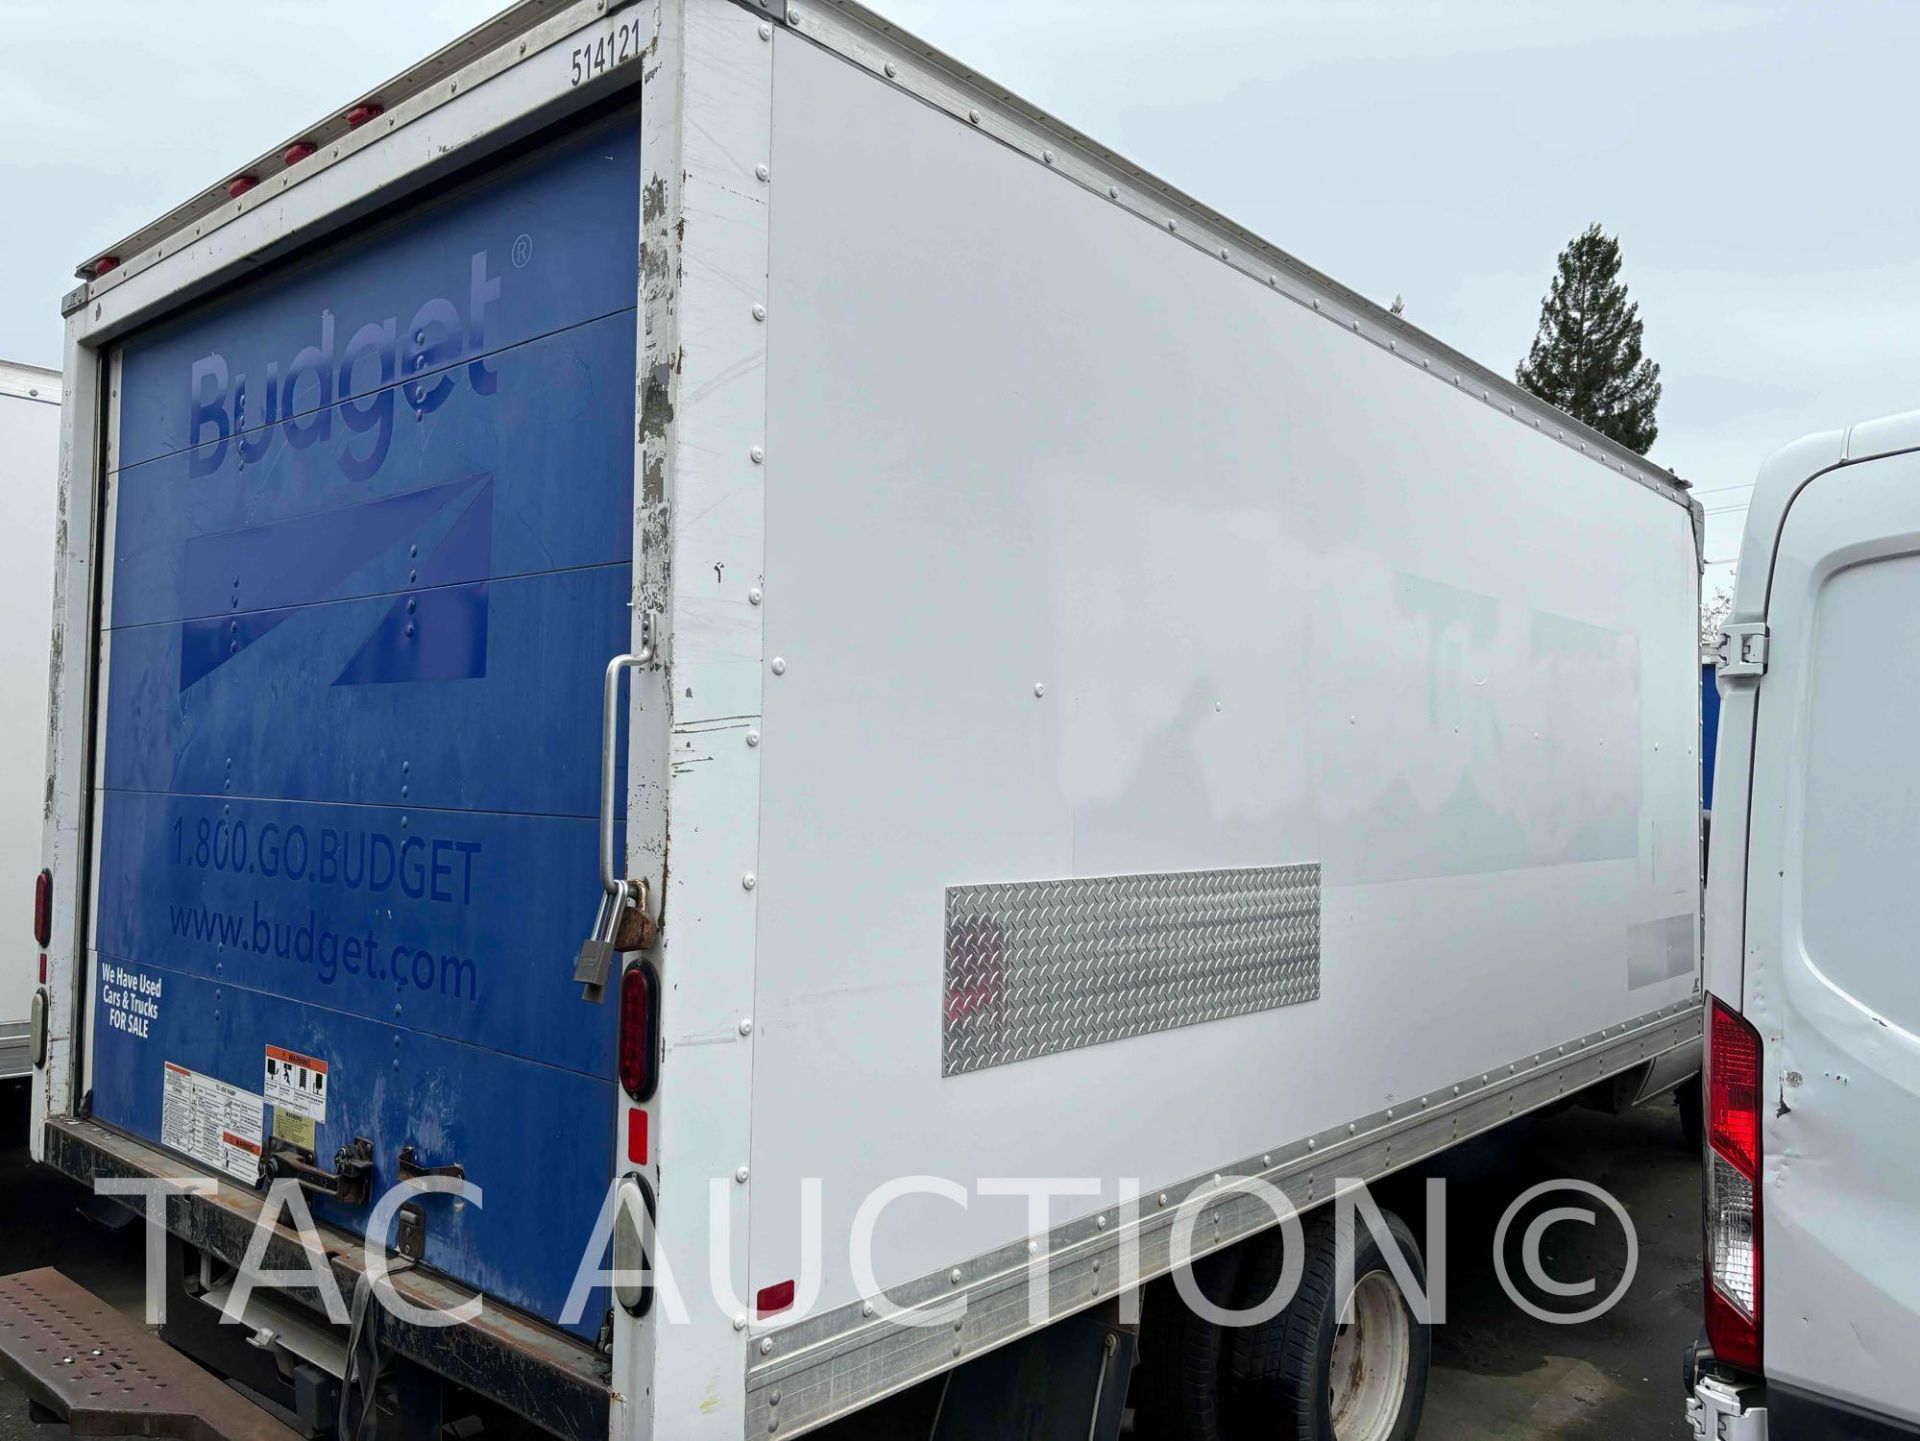 2015 Ford E-350 16ft Box Truck - Image 38 of 98